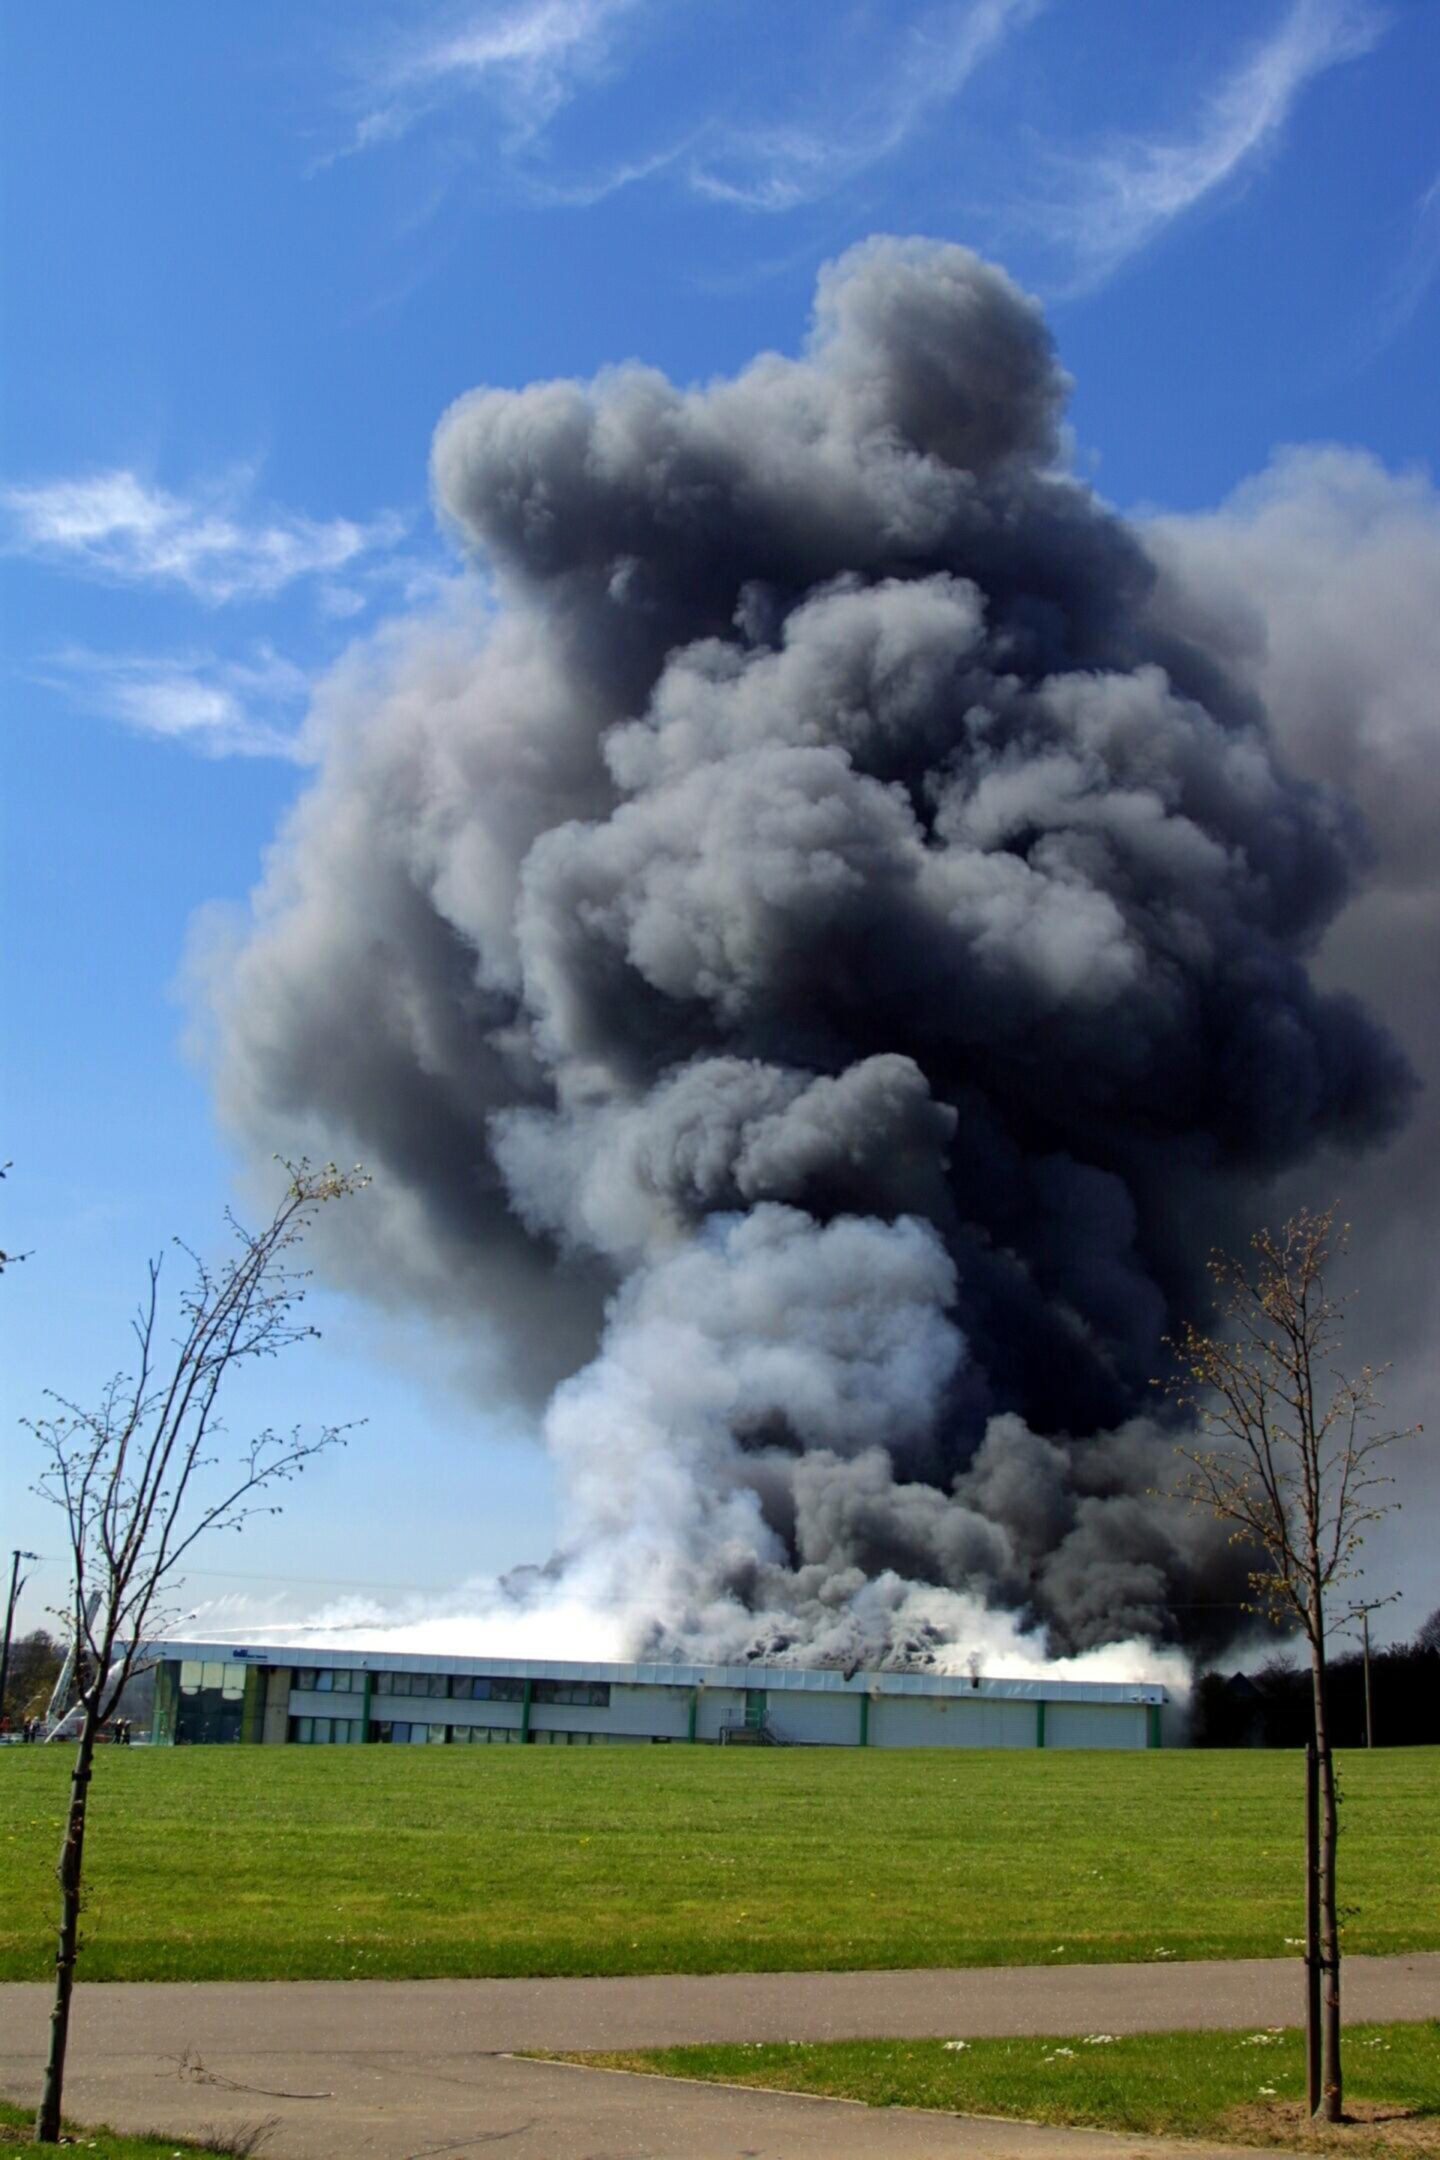 The billowing smoke could have been toxic to people in the surrounding vicinity.